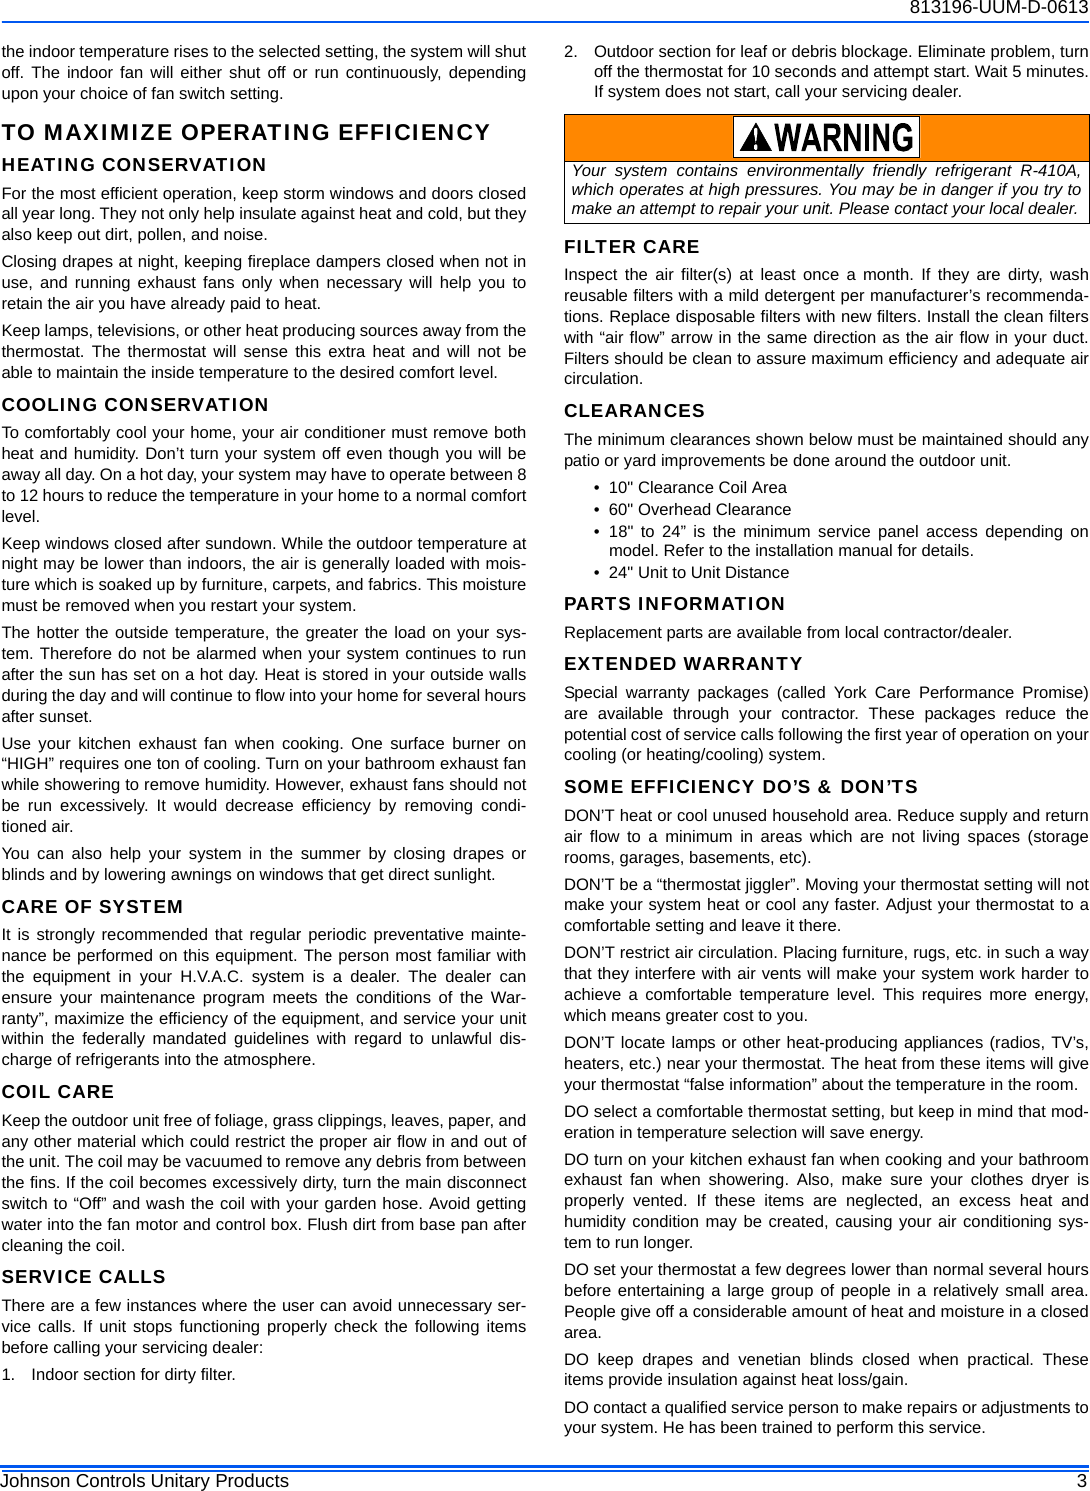 Page 3 of 6 - York Affinity-Tchd-Air-Conditioner-Owner-S 813196-UUM-D-0613 User Manual York-affinity-tchd-air-conditioner-owner-s-manual